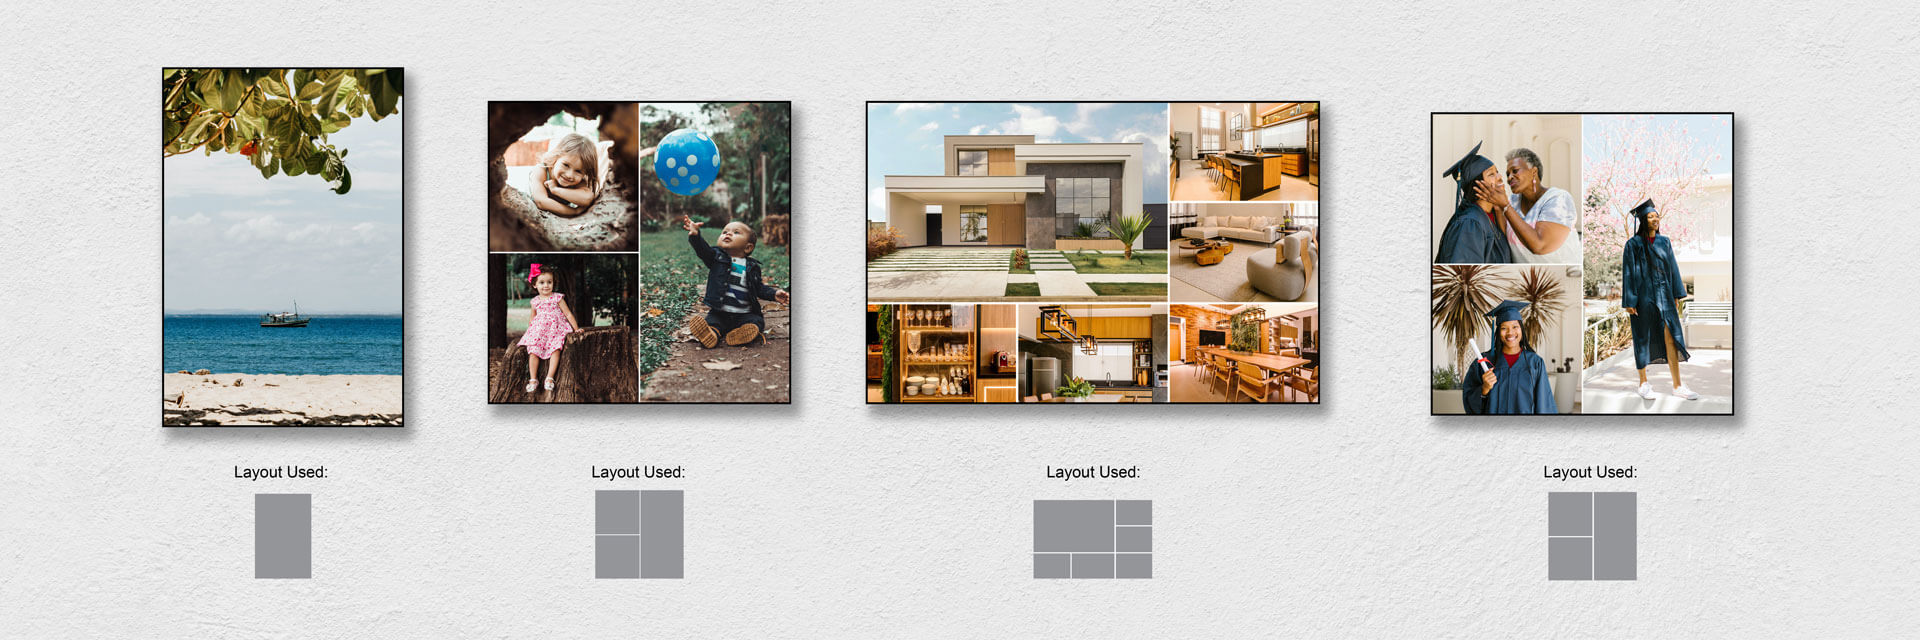 Examples of custom collage maker layouts and inspiration for what photos might look like when printed in different layouts.